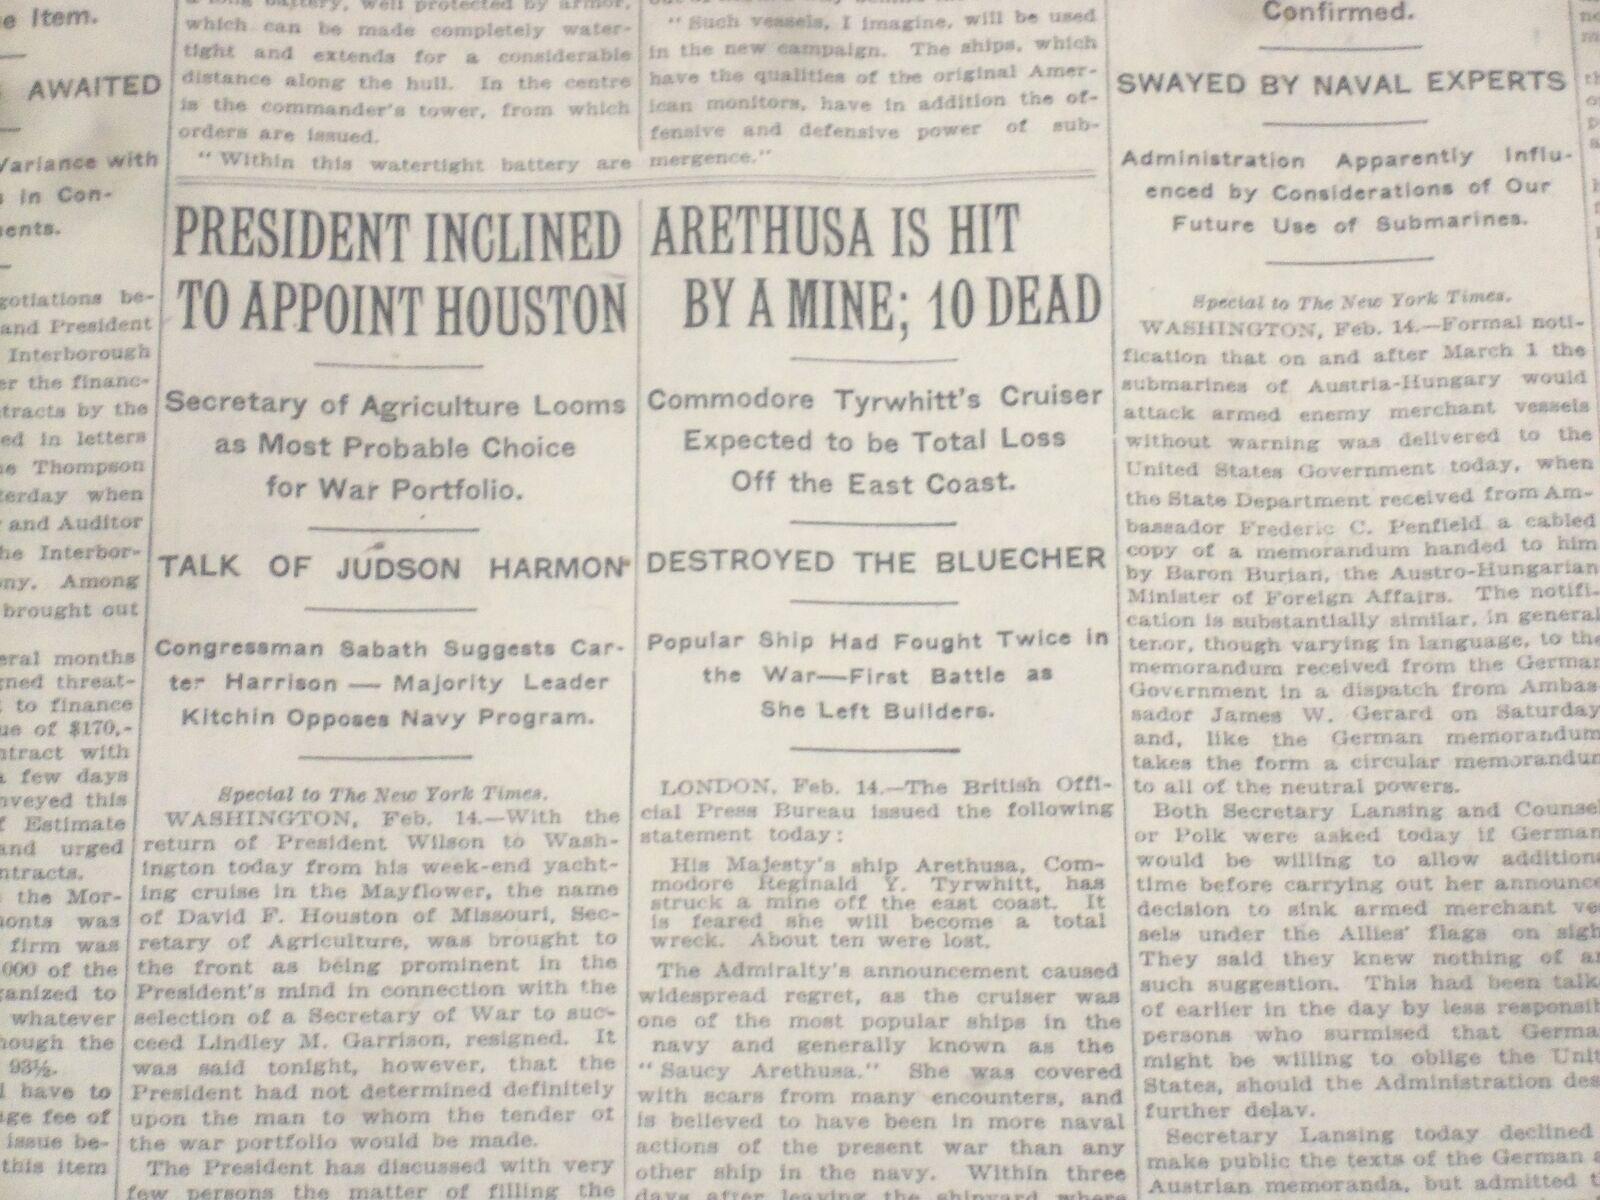 1916 FEBRUARY 15 NEW YORK TIMES - ARETHUSA IS HIT BY MINE, 10 DEAD - NT 9036